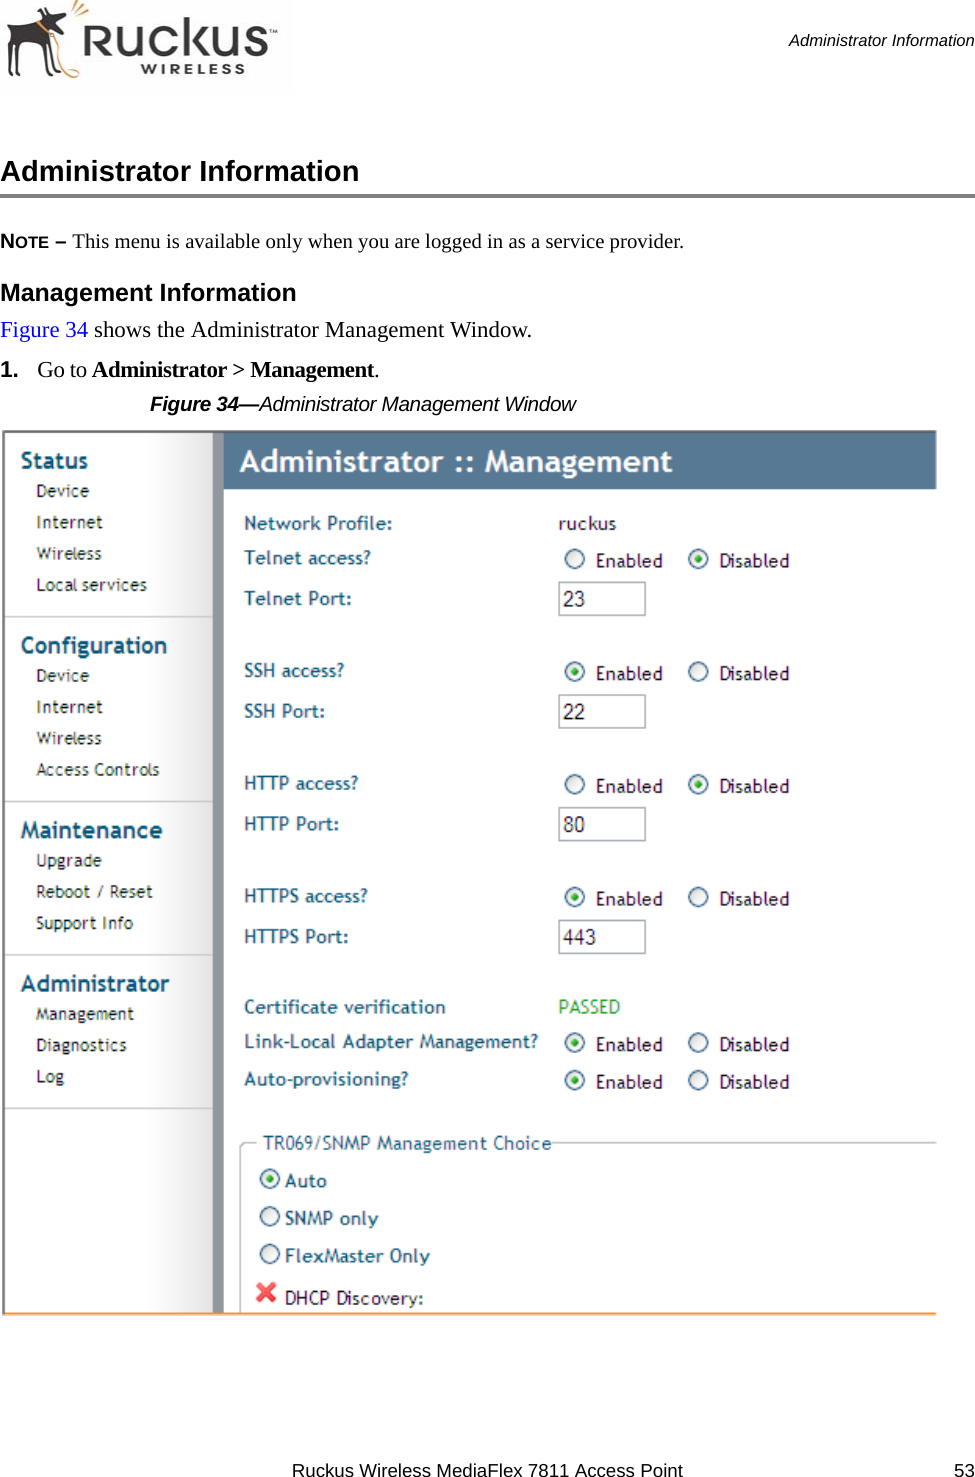 Ruckus Wireless MediaFlex 7811 Access Point 53Administrator InformationAdministrator InformationNOTE – This menu is available only when you are logged in as a service provider.Management InformationFigure 34 shows the Administrator Management Window. 1. Go to Administrator &gt; Management.Figure 34—Administrator Management Window